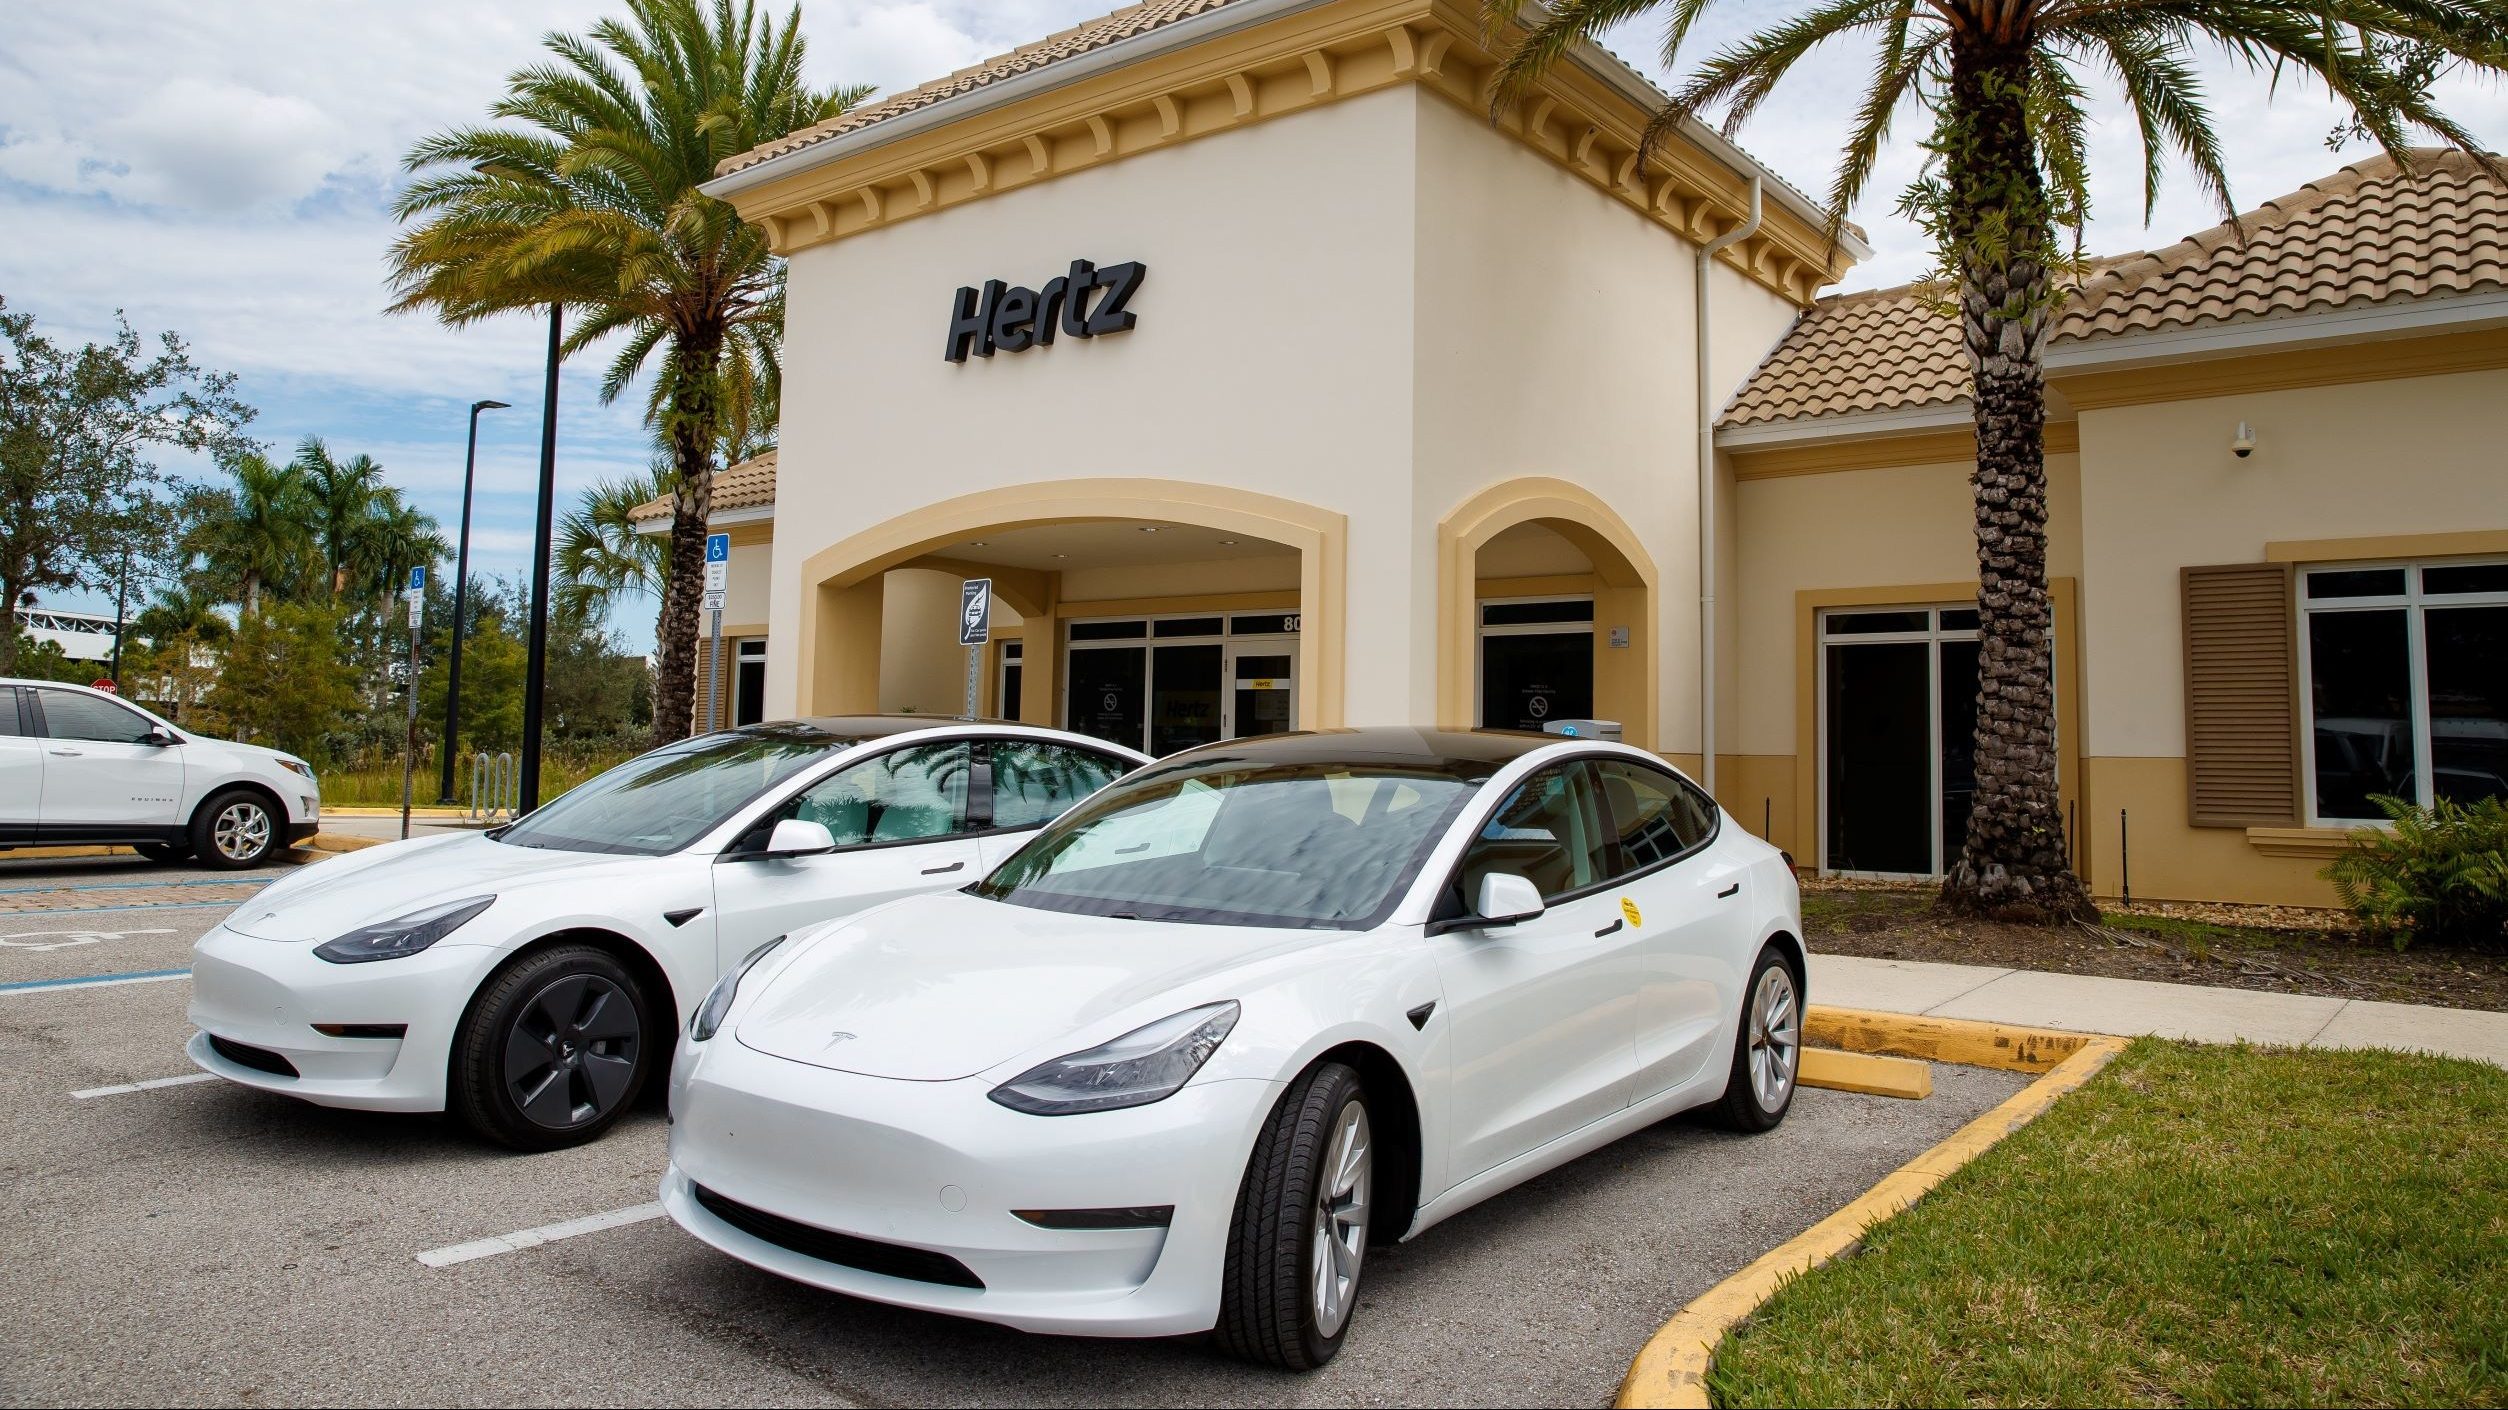 Hertz Faces Tough Times: Why Their Big Bet on Tesla Electric Cars Is Costing Millions